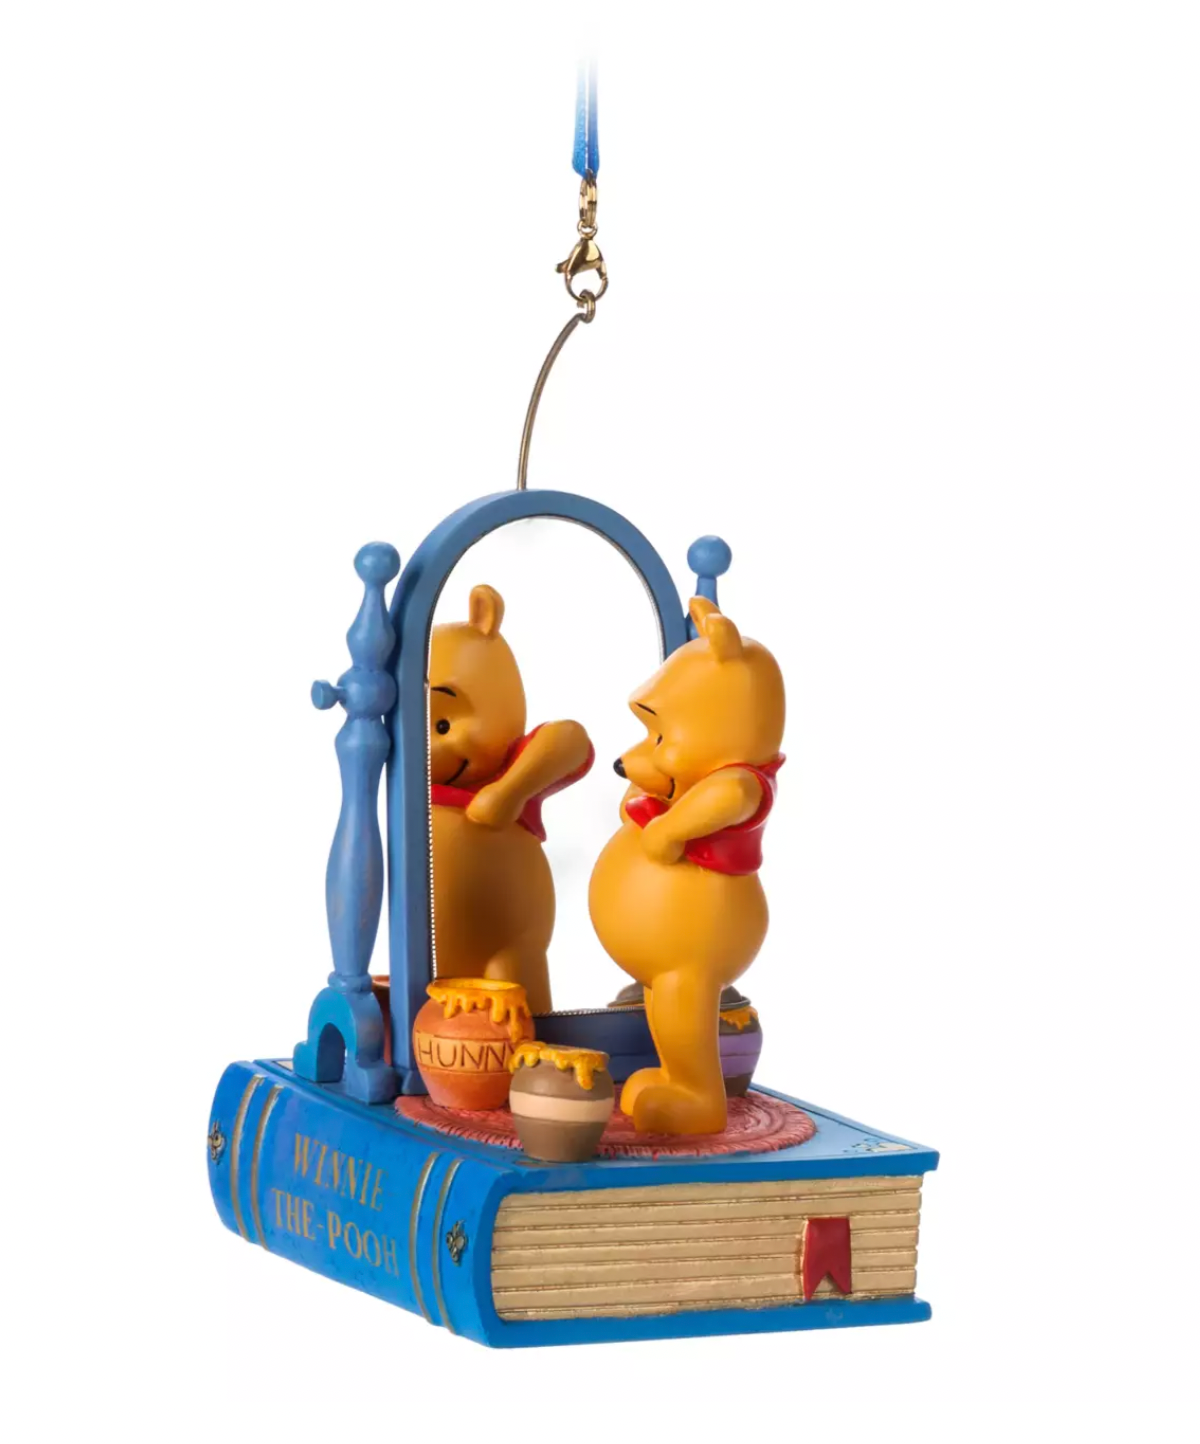 Disney Sketchbook Winnie the Pooh Singing Magic Christmas Ornament New with Tag